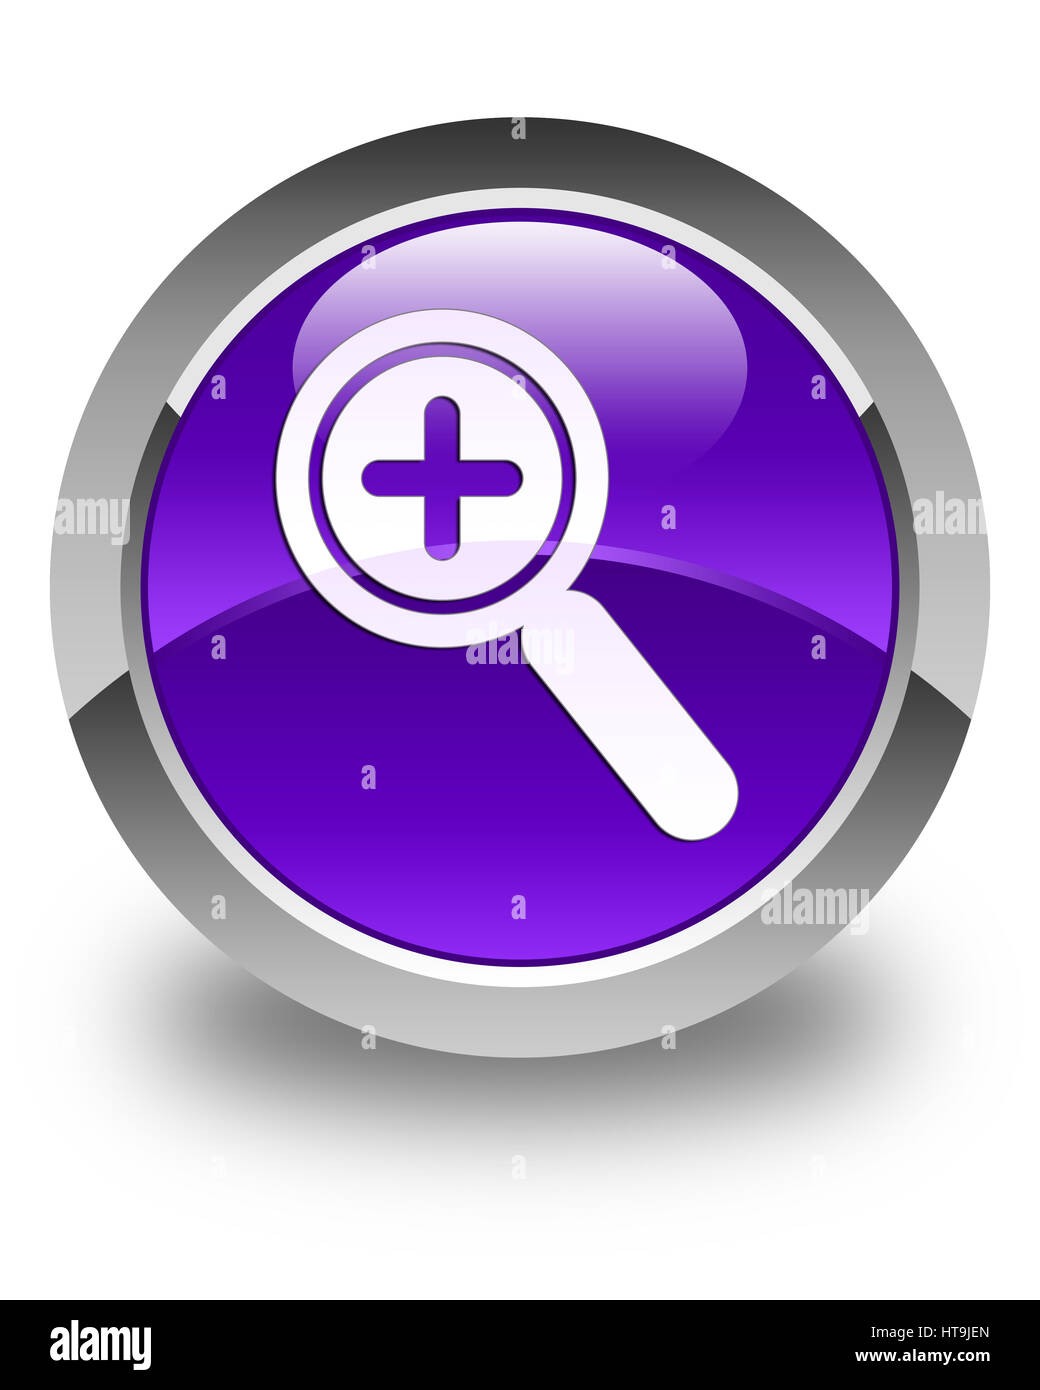 Zoom in icon isolated on glossy purple round button abstract illustration Stock Photo